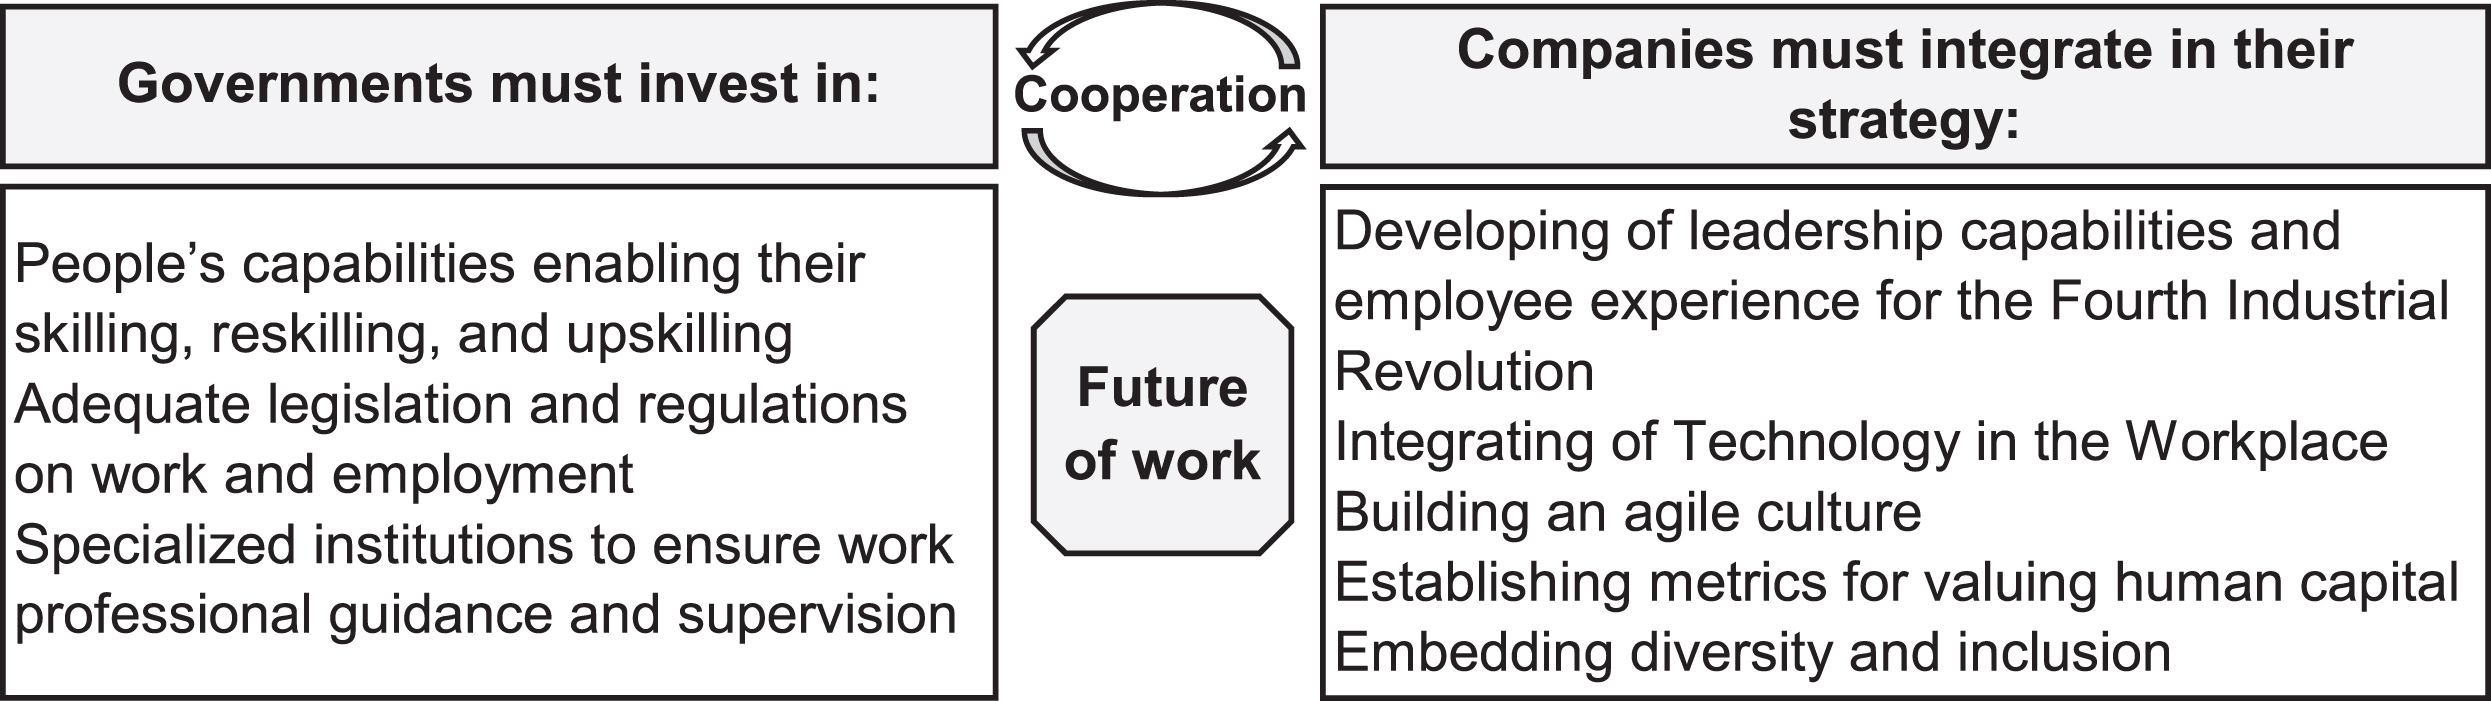 A human centered approach to future of work.